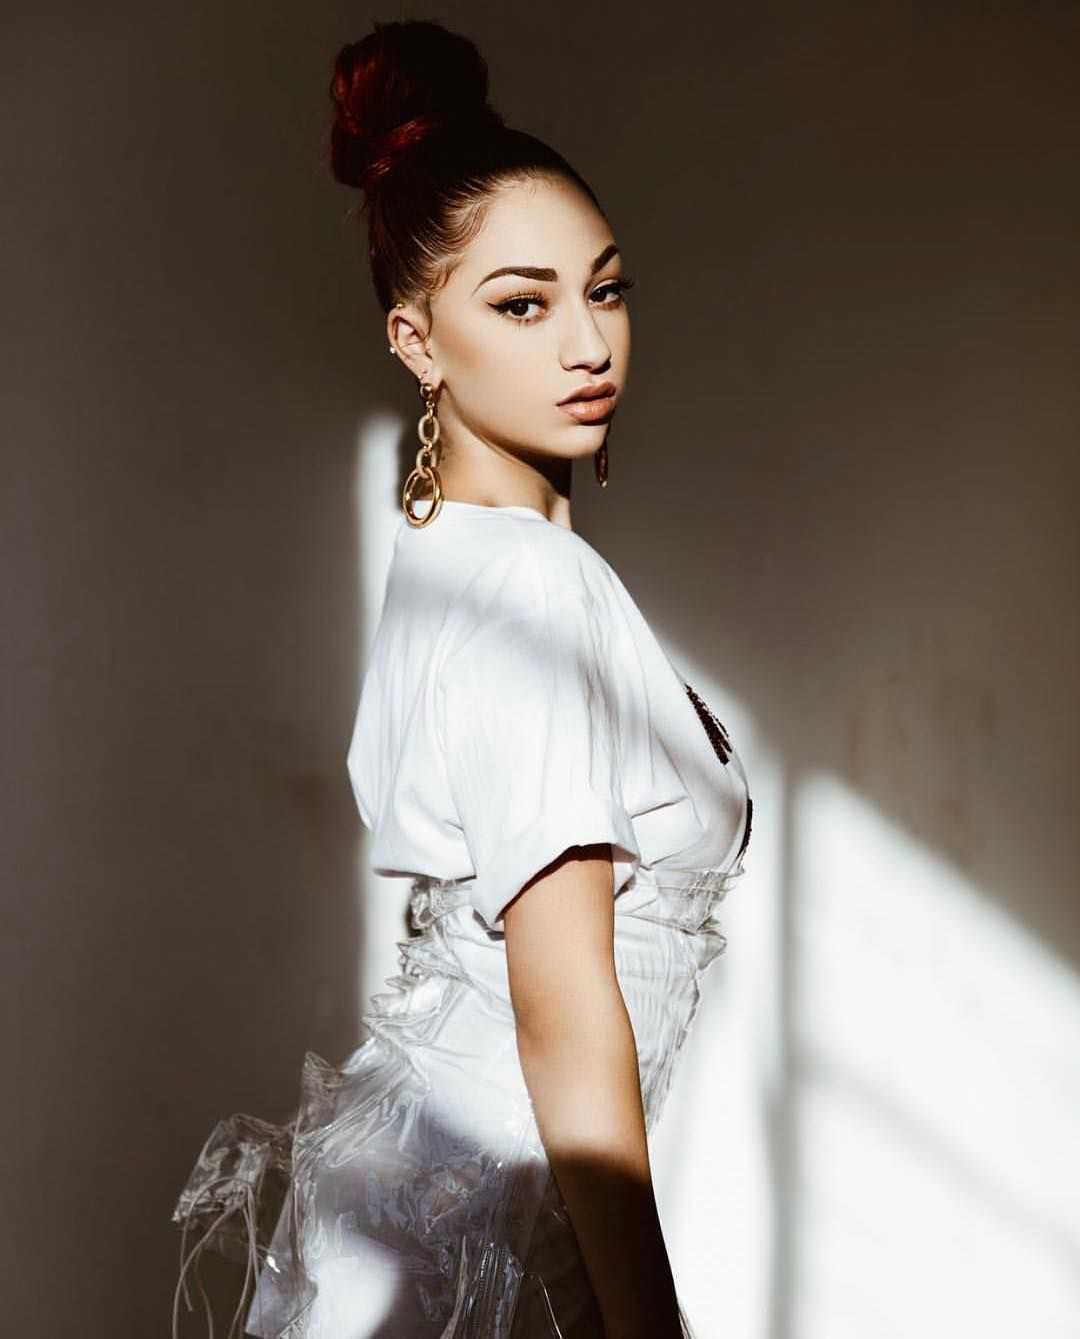 70+ Hot Pictures Of Danielle Bregoli aka Bhad Bhabie Which Will Win Your Heart 74